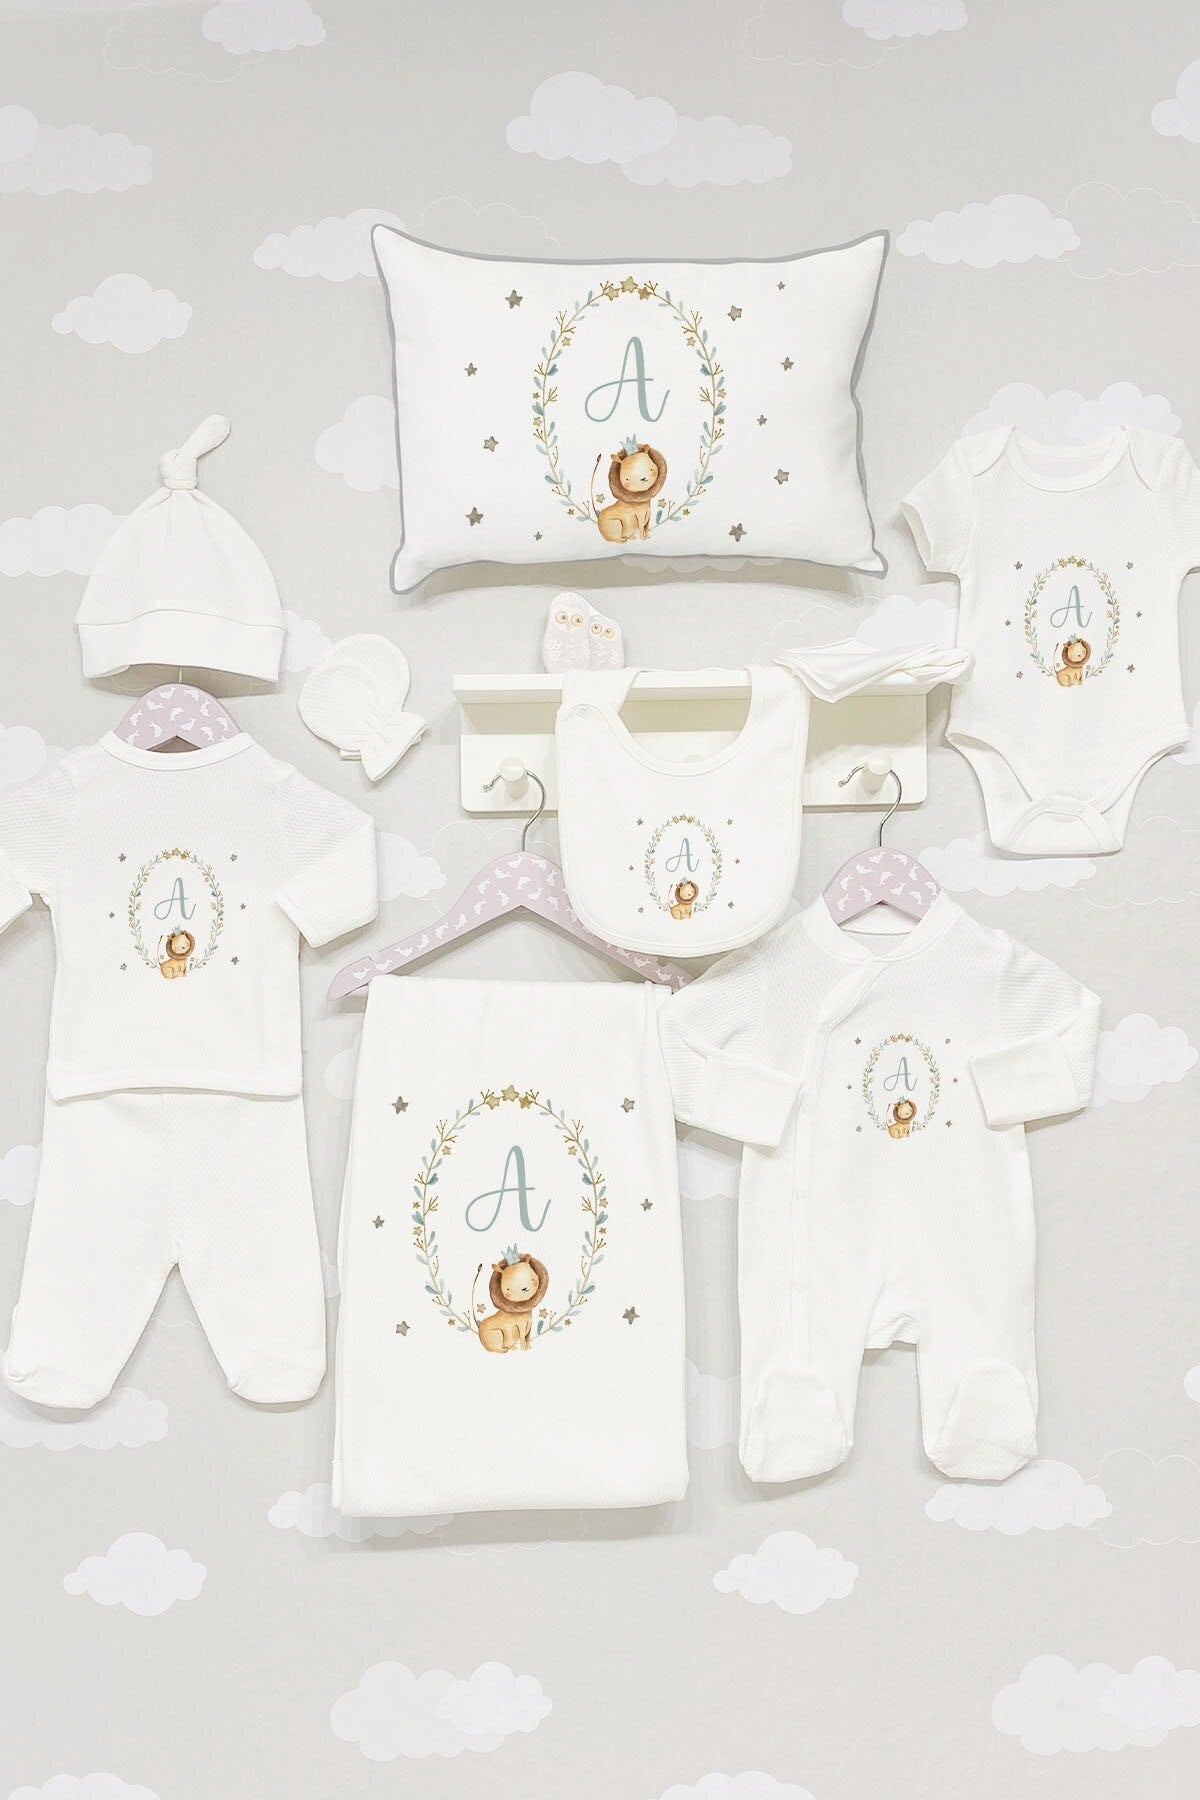 Organic 11 Piece Jacquard Hospital Output-Letter Series-A Letter Baby Set Lux 100 Cotton High Quality baby magazin 